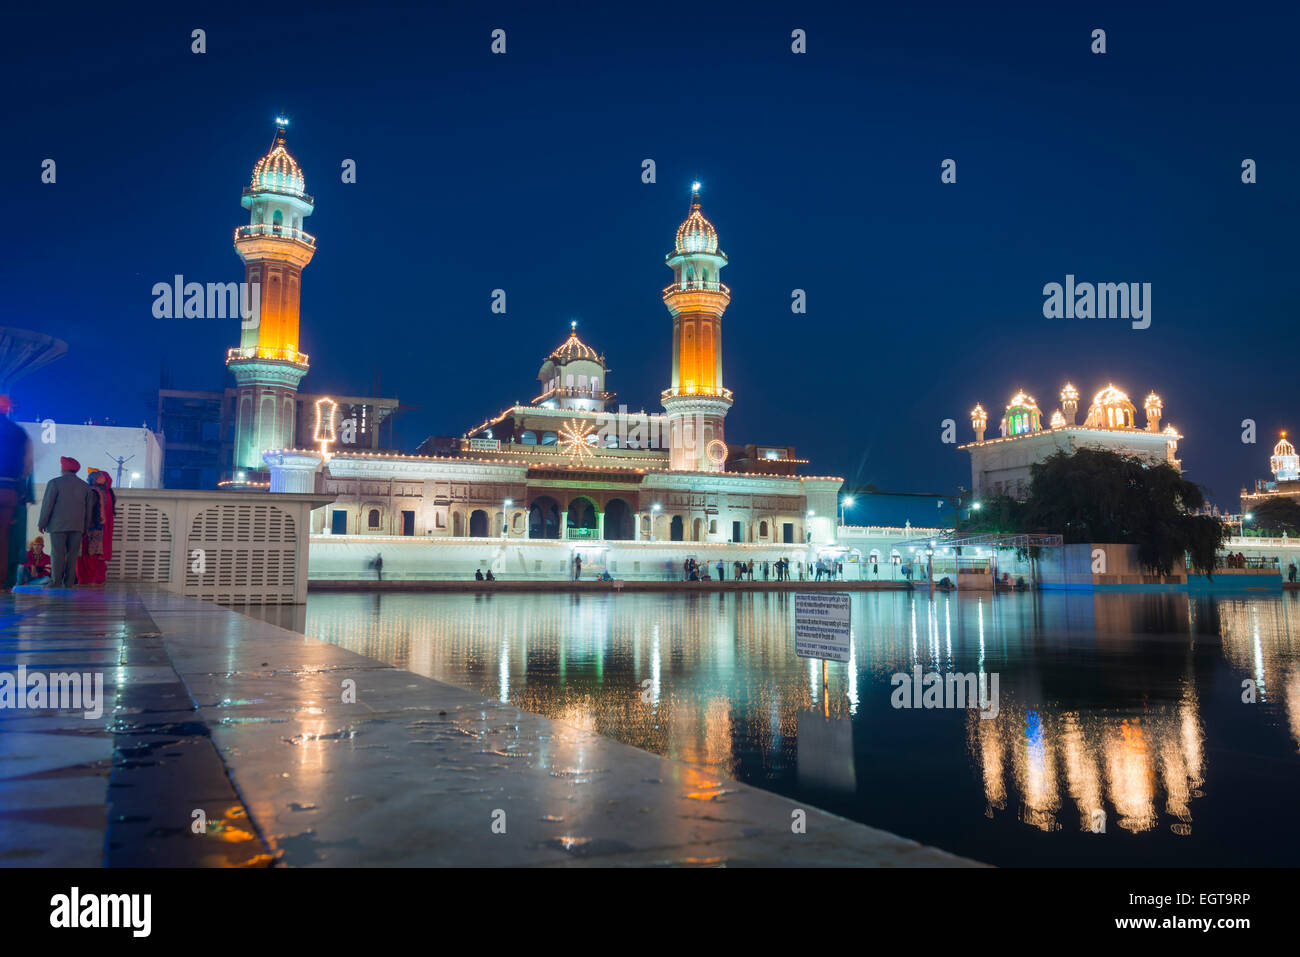 Minarets of The Golden Temple lit up at dusk in Amritsar, India Stock Photo